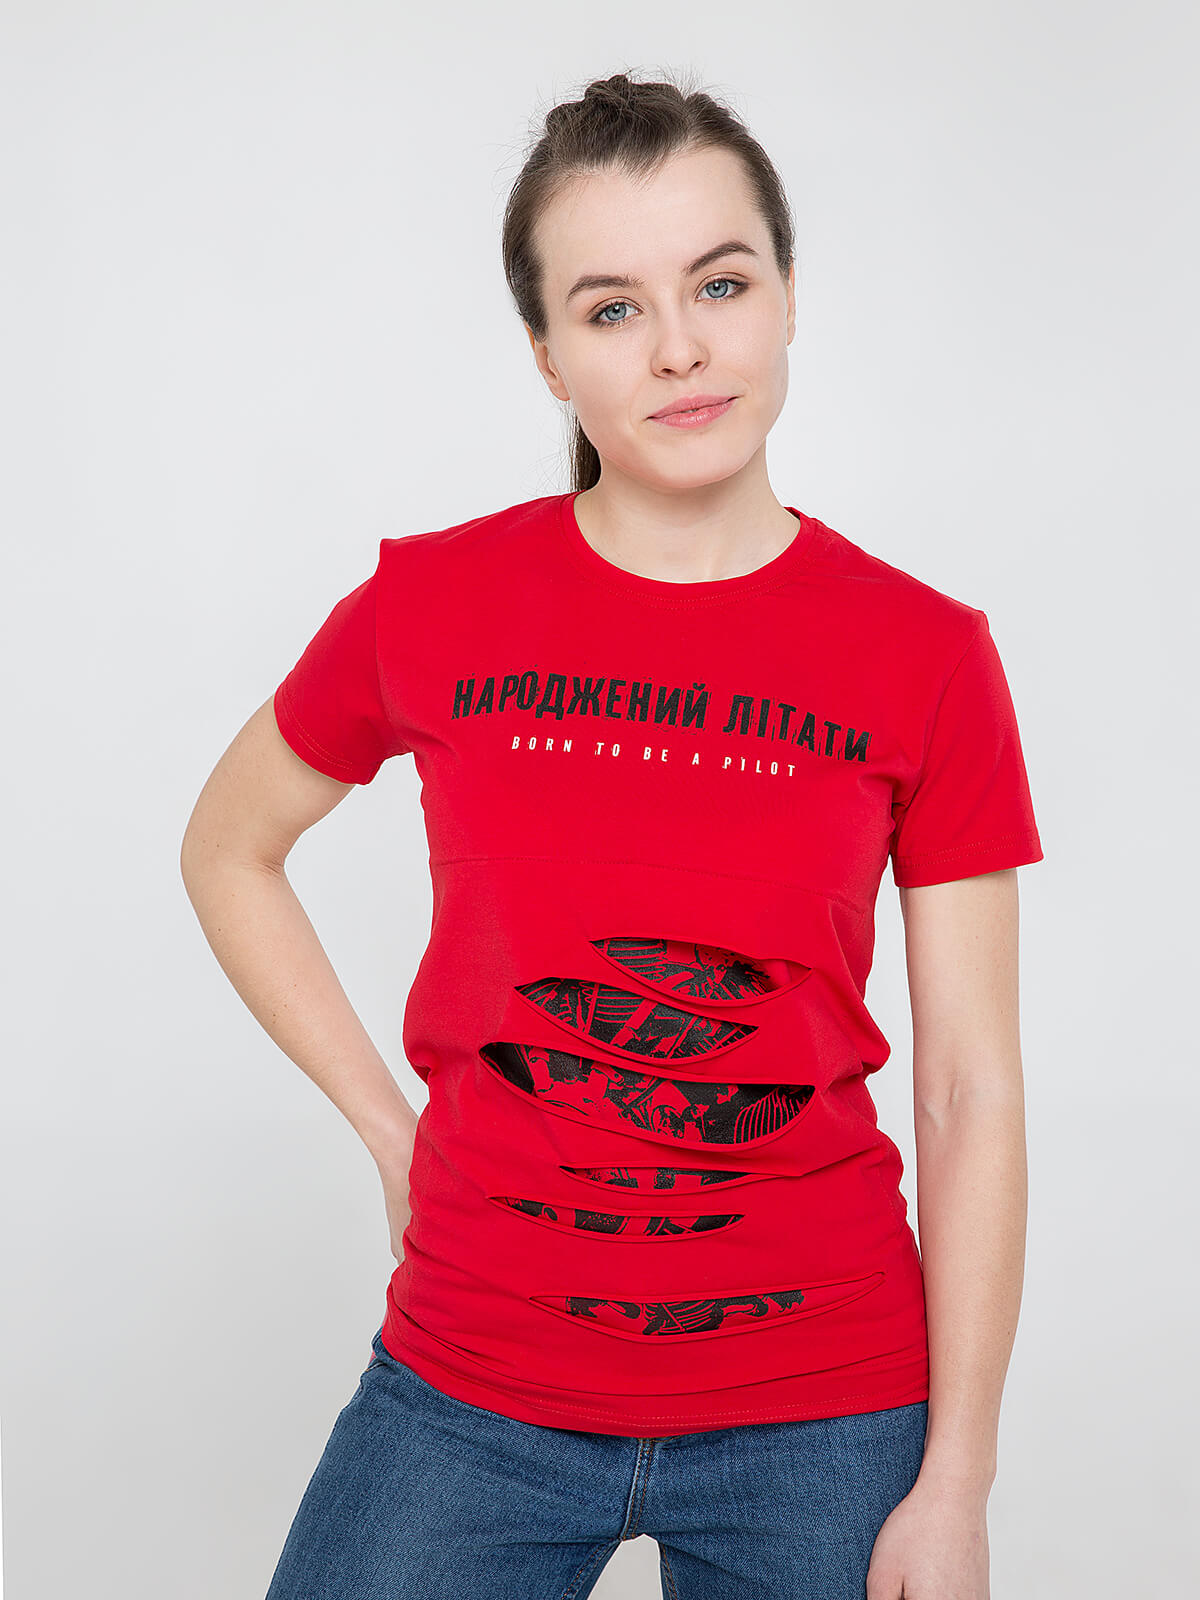 Women's T-Shirt Born To Fly. Color red. Unisex T-shirt (men’s sizes).